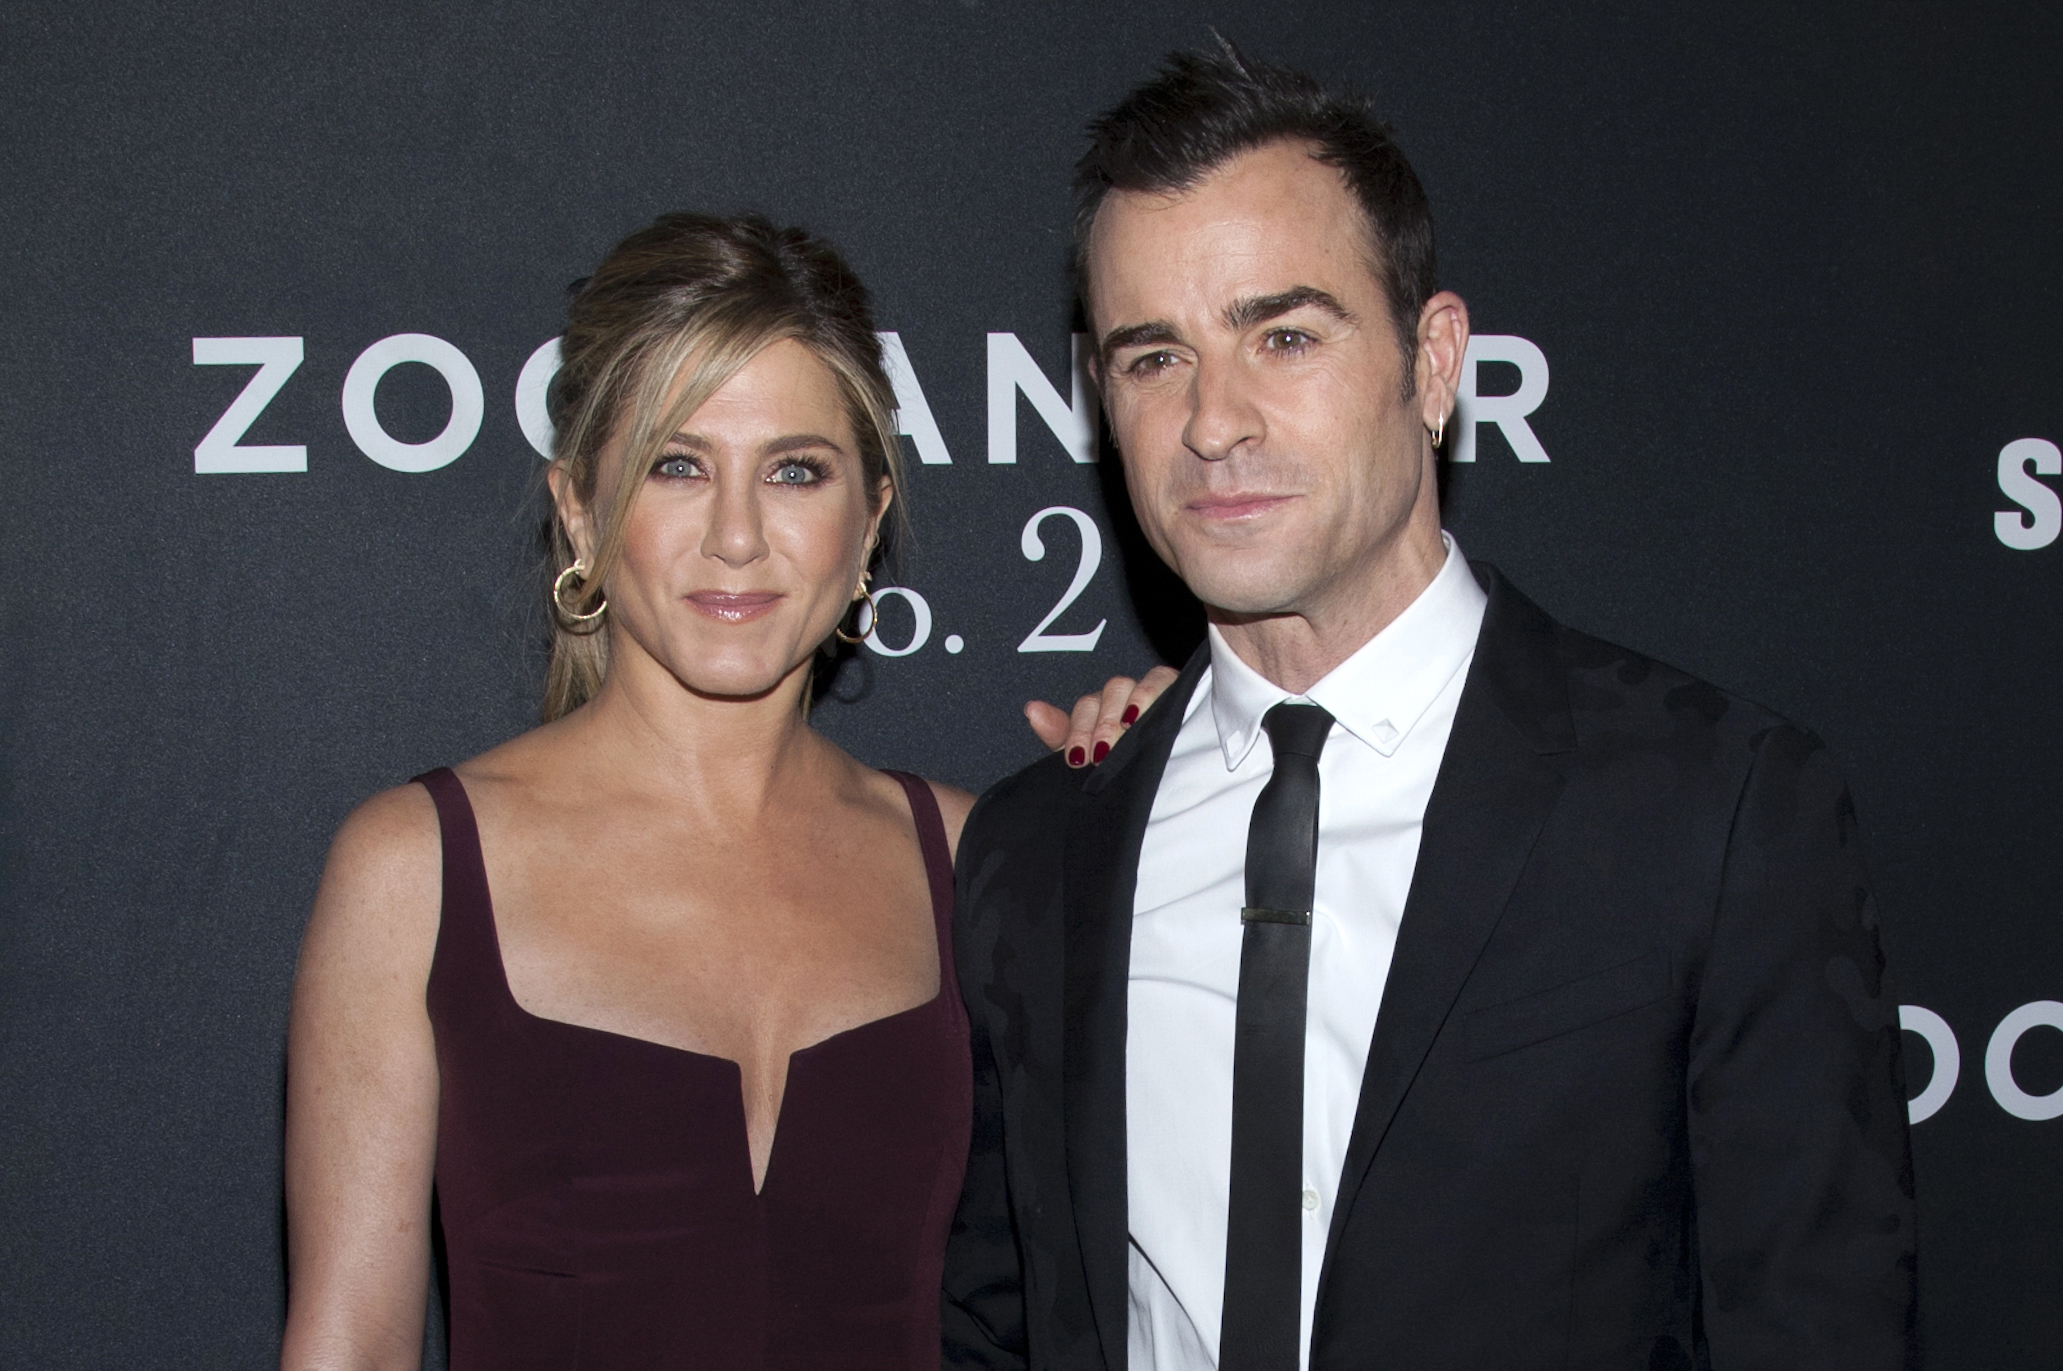 PHOTO: Jennifer Aniston and Justin Theroux attend the "Zoolander 2" world premiere at Alice Tully Hall in New York City.